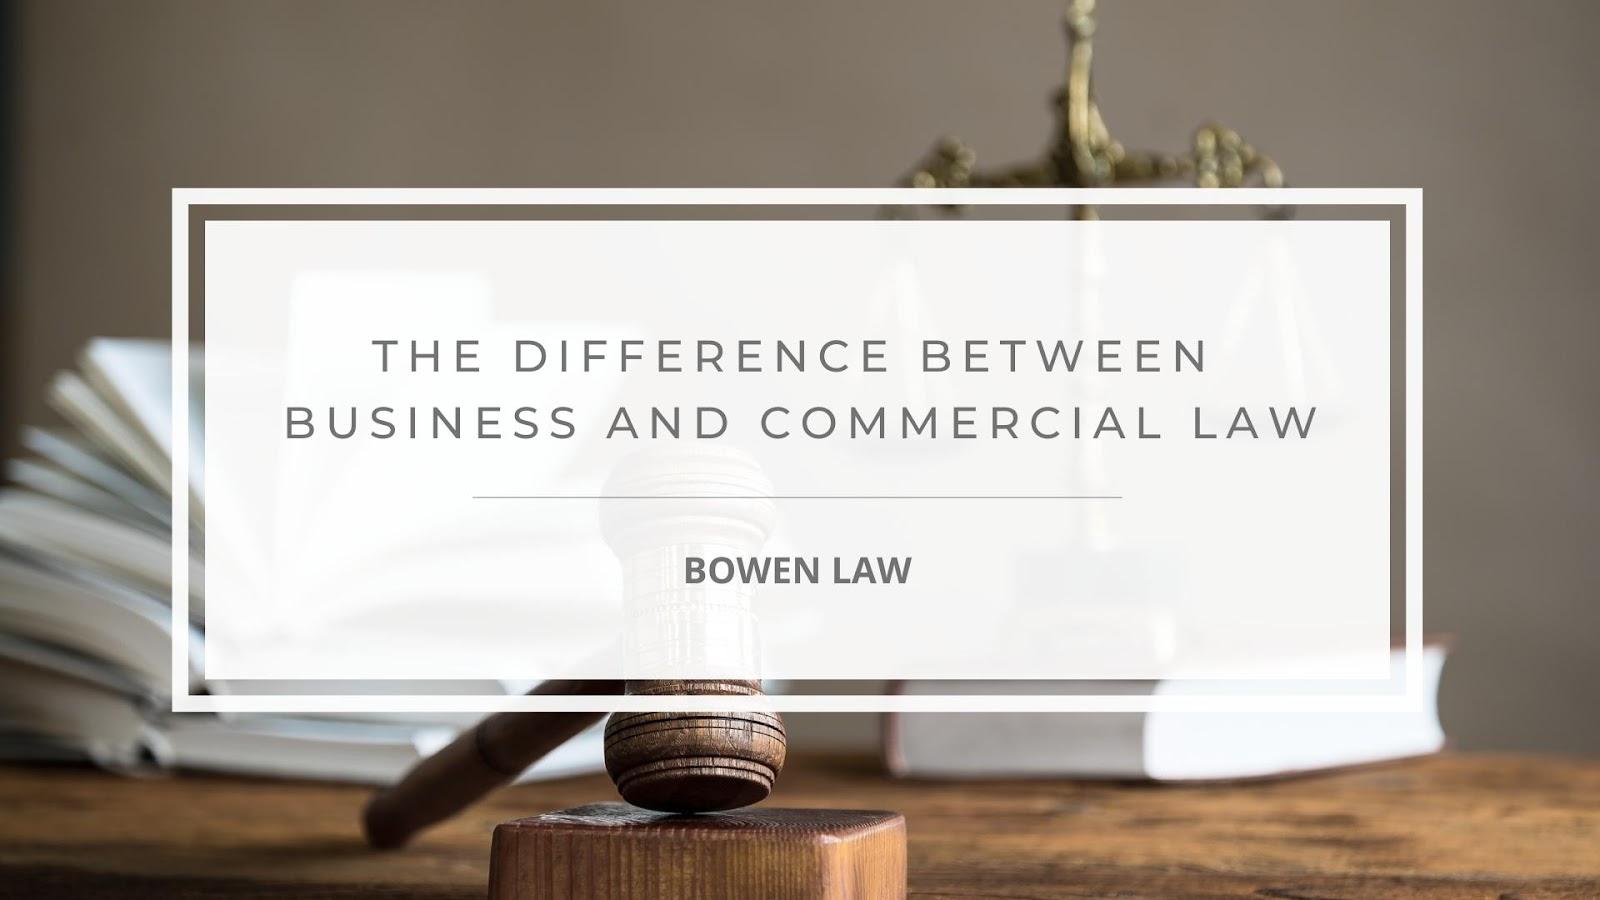 Featured Image of the difference between business and commercial law